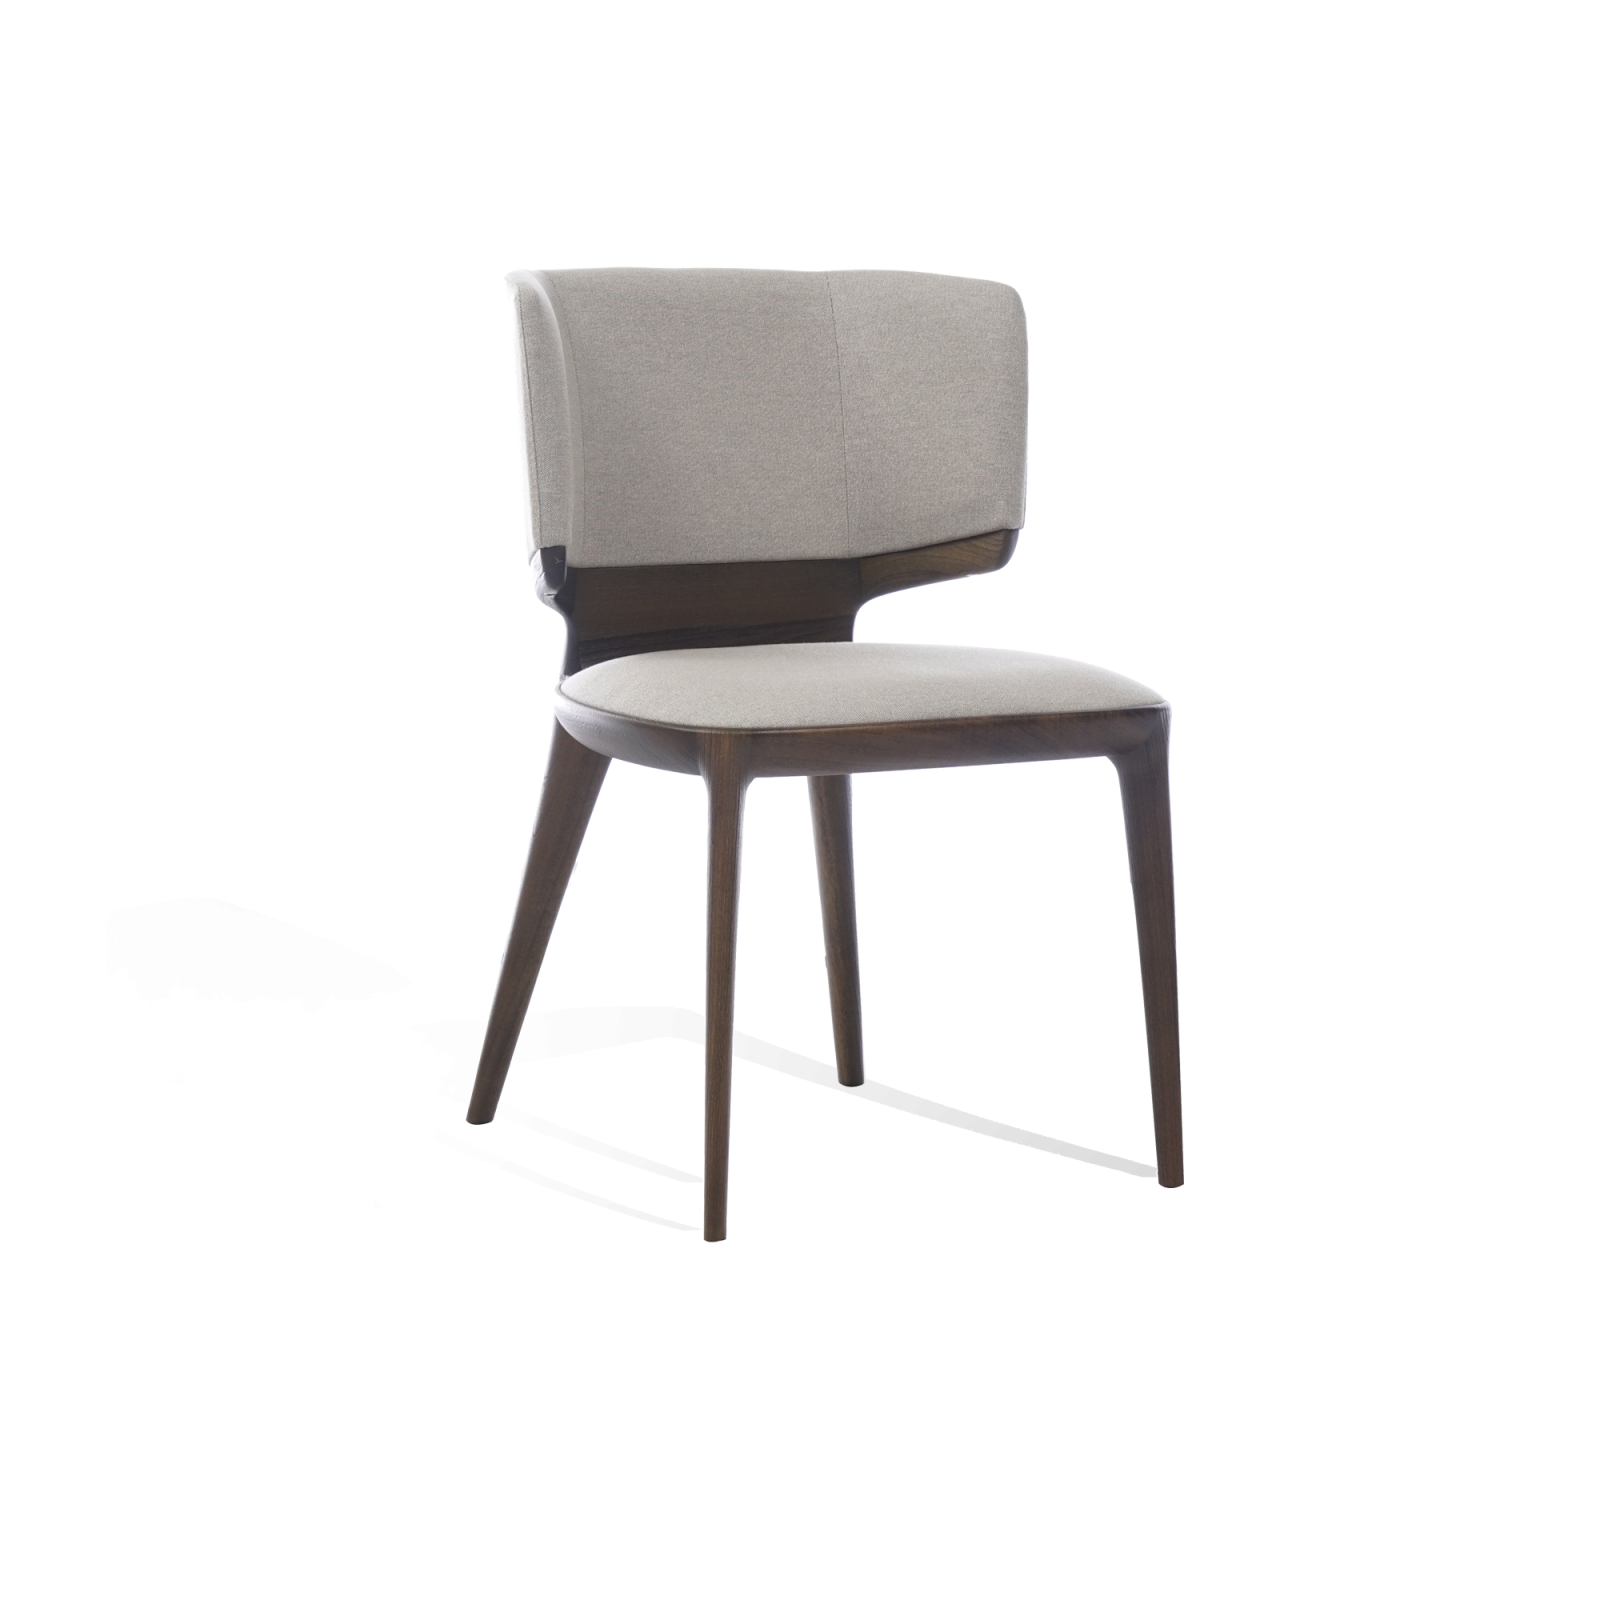 Violet chair, with its ergonomic comfortable form and solid wood and fine workmanship of the metal details on the foot.